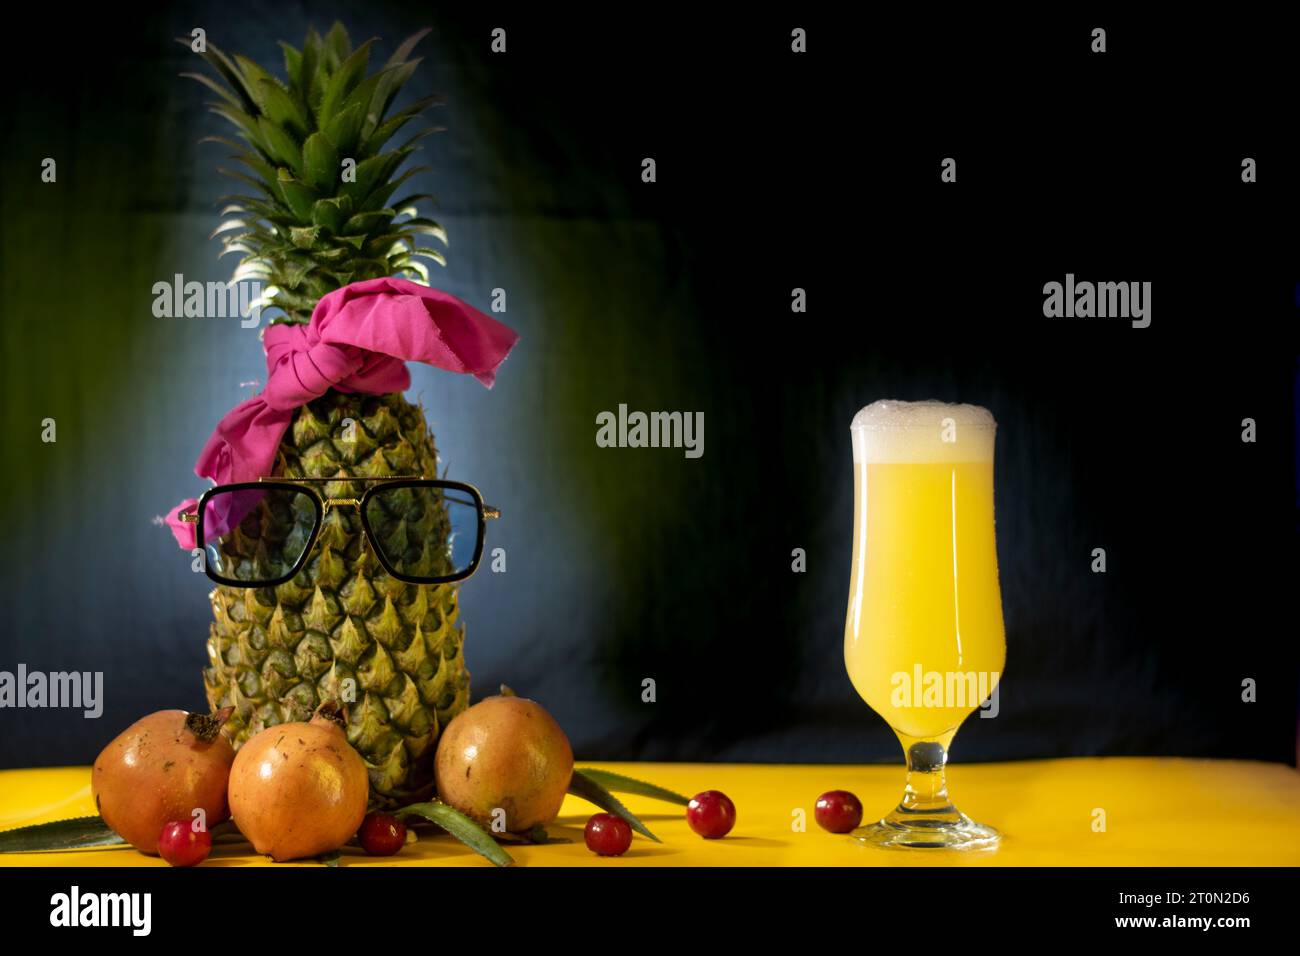 Tropical Dreams: Pineapple Art Photography Delights Stock Photo